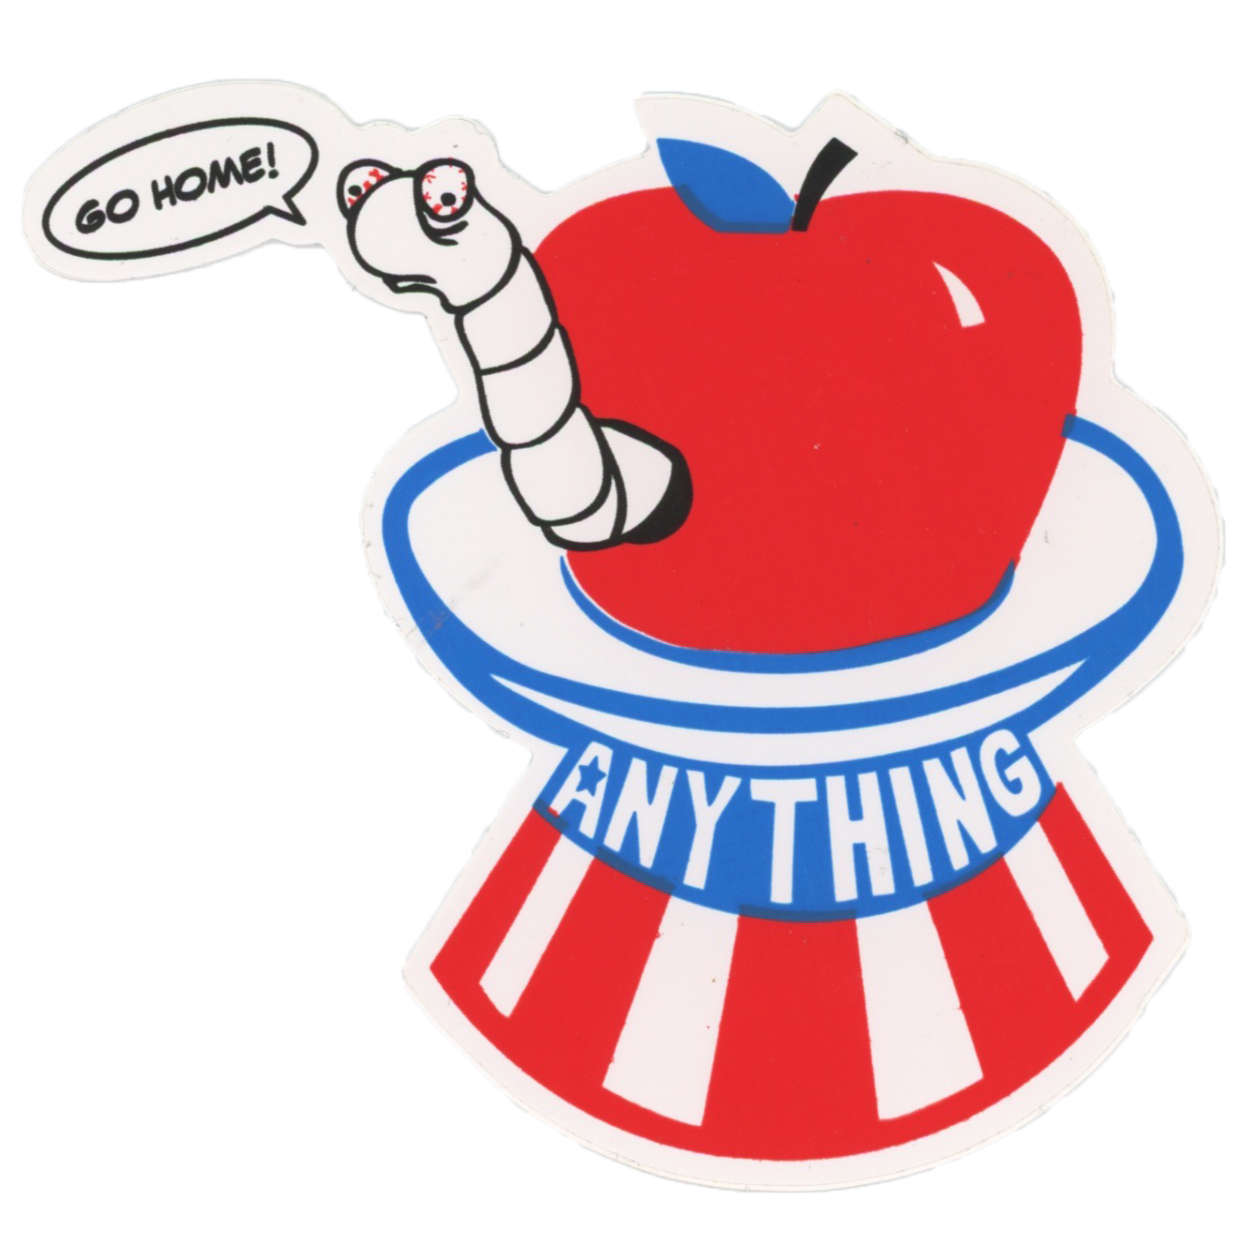 A NY Thing Go Home Worm in Apple Sticker